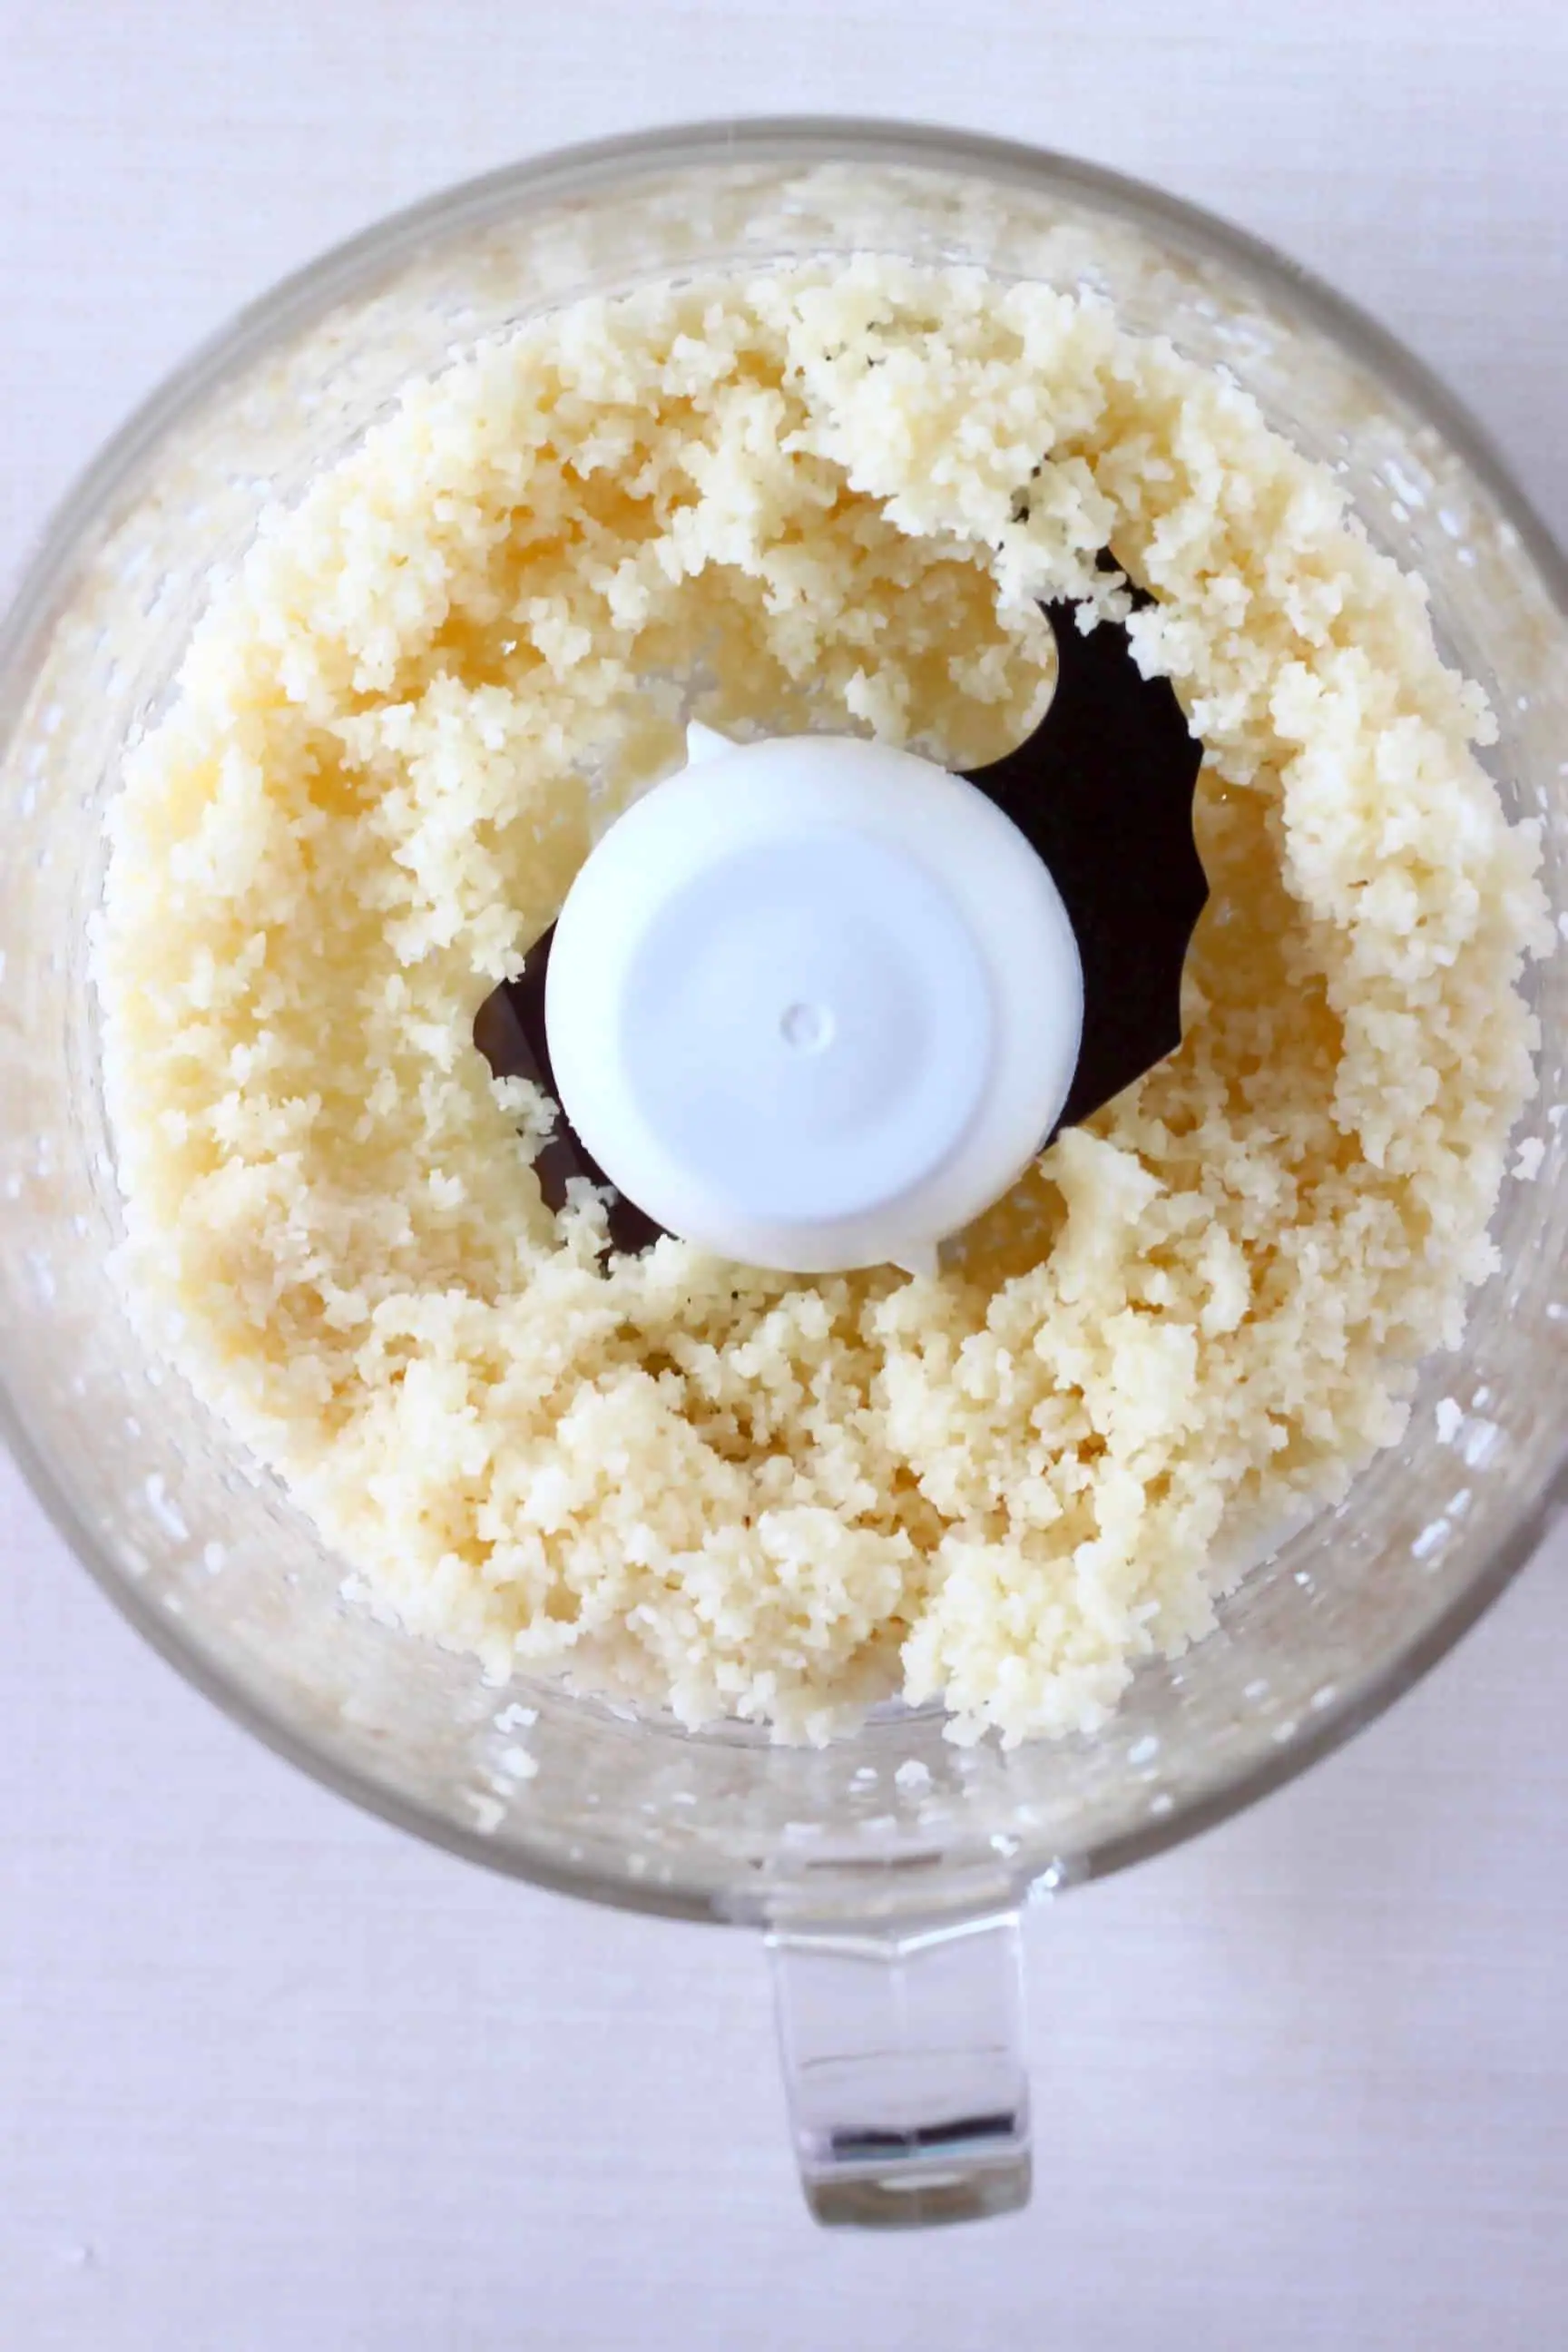 Shredded coconut in a food processor against a white background